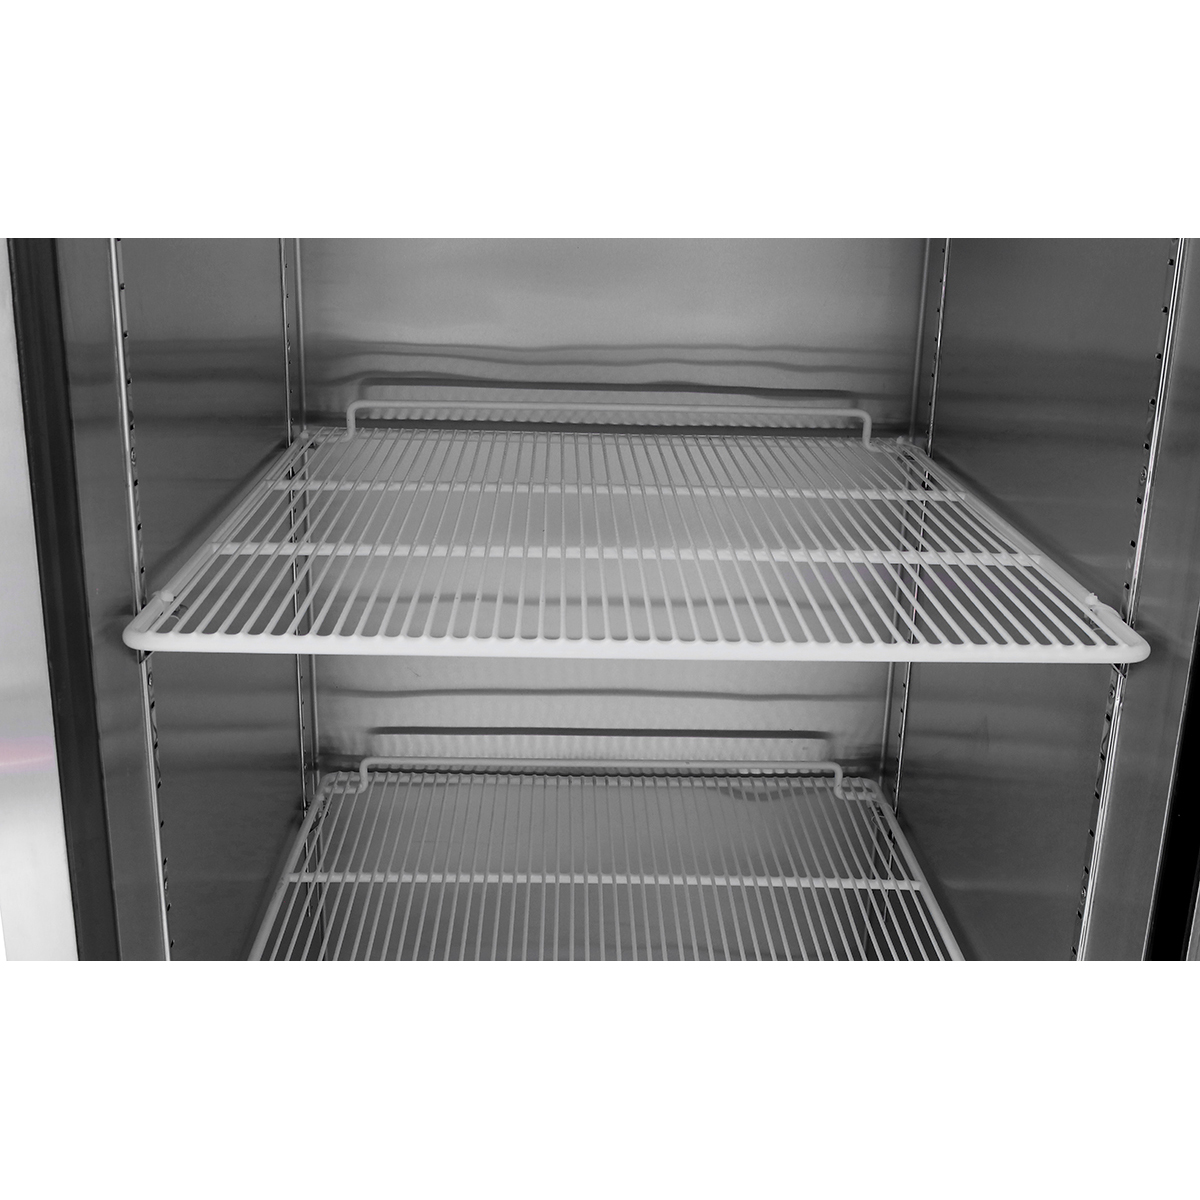 Atosa MBF8001GR Reach-In Top Mount Freezer 28-7/8"W x 31-1/2"D x 82-7/8"H with Locking Solid Door image 4